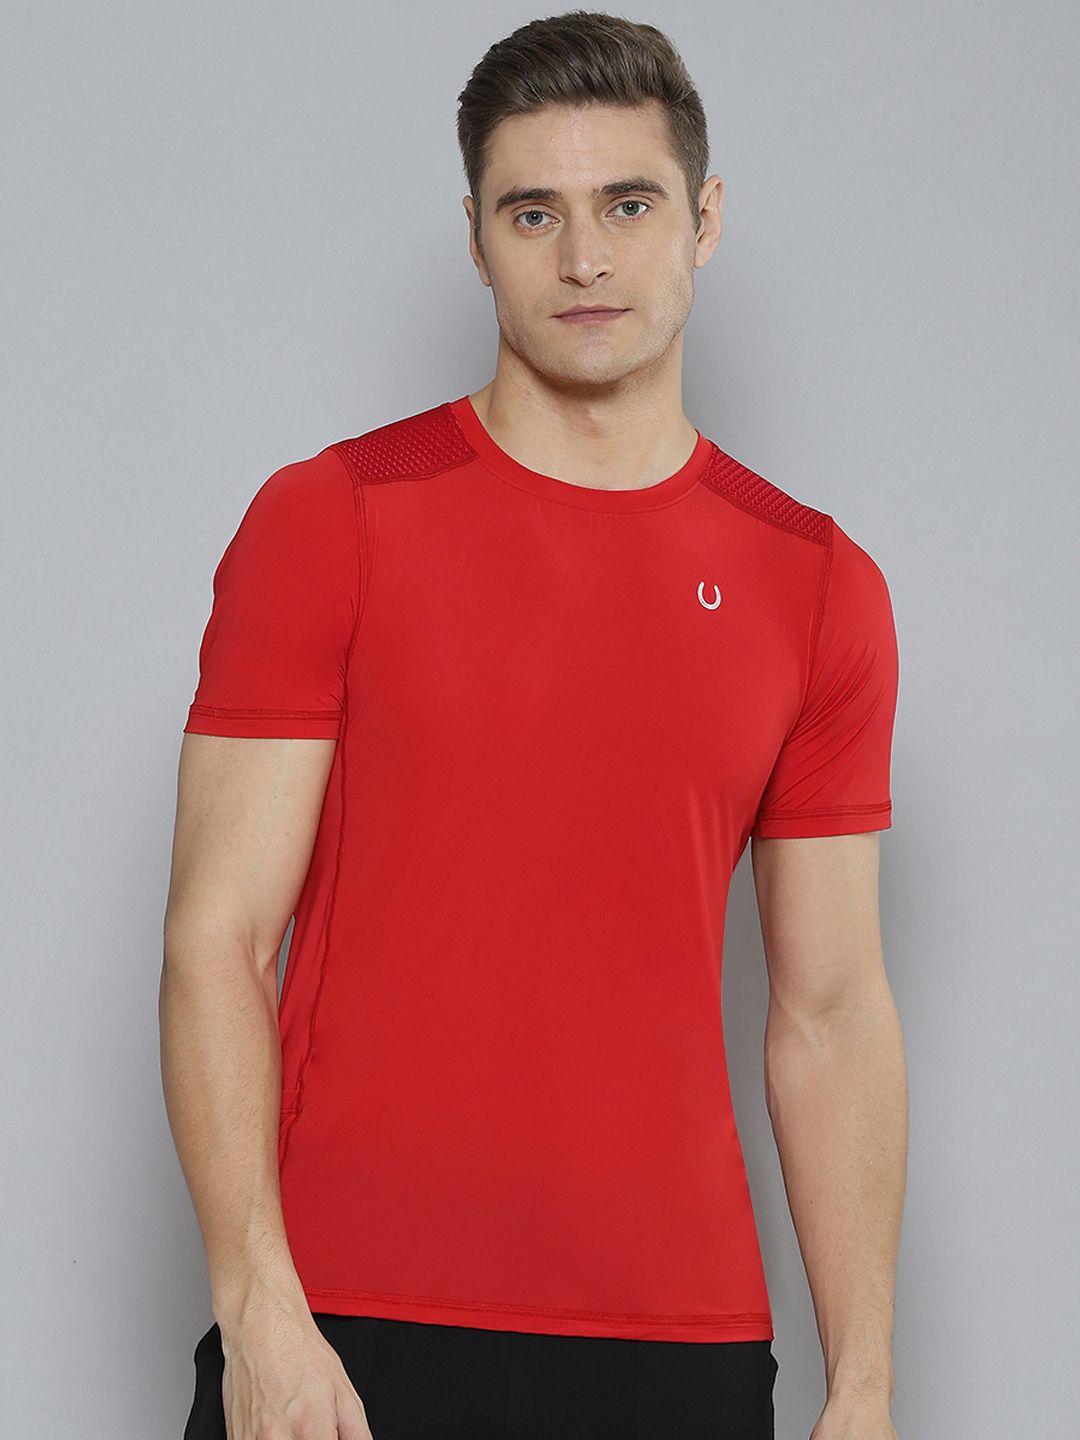 fitkin men red anti odour gym t-shirt